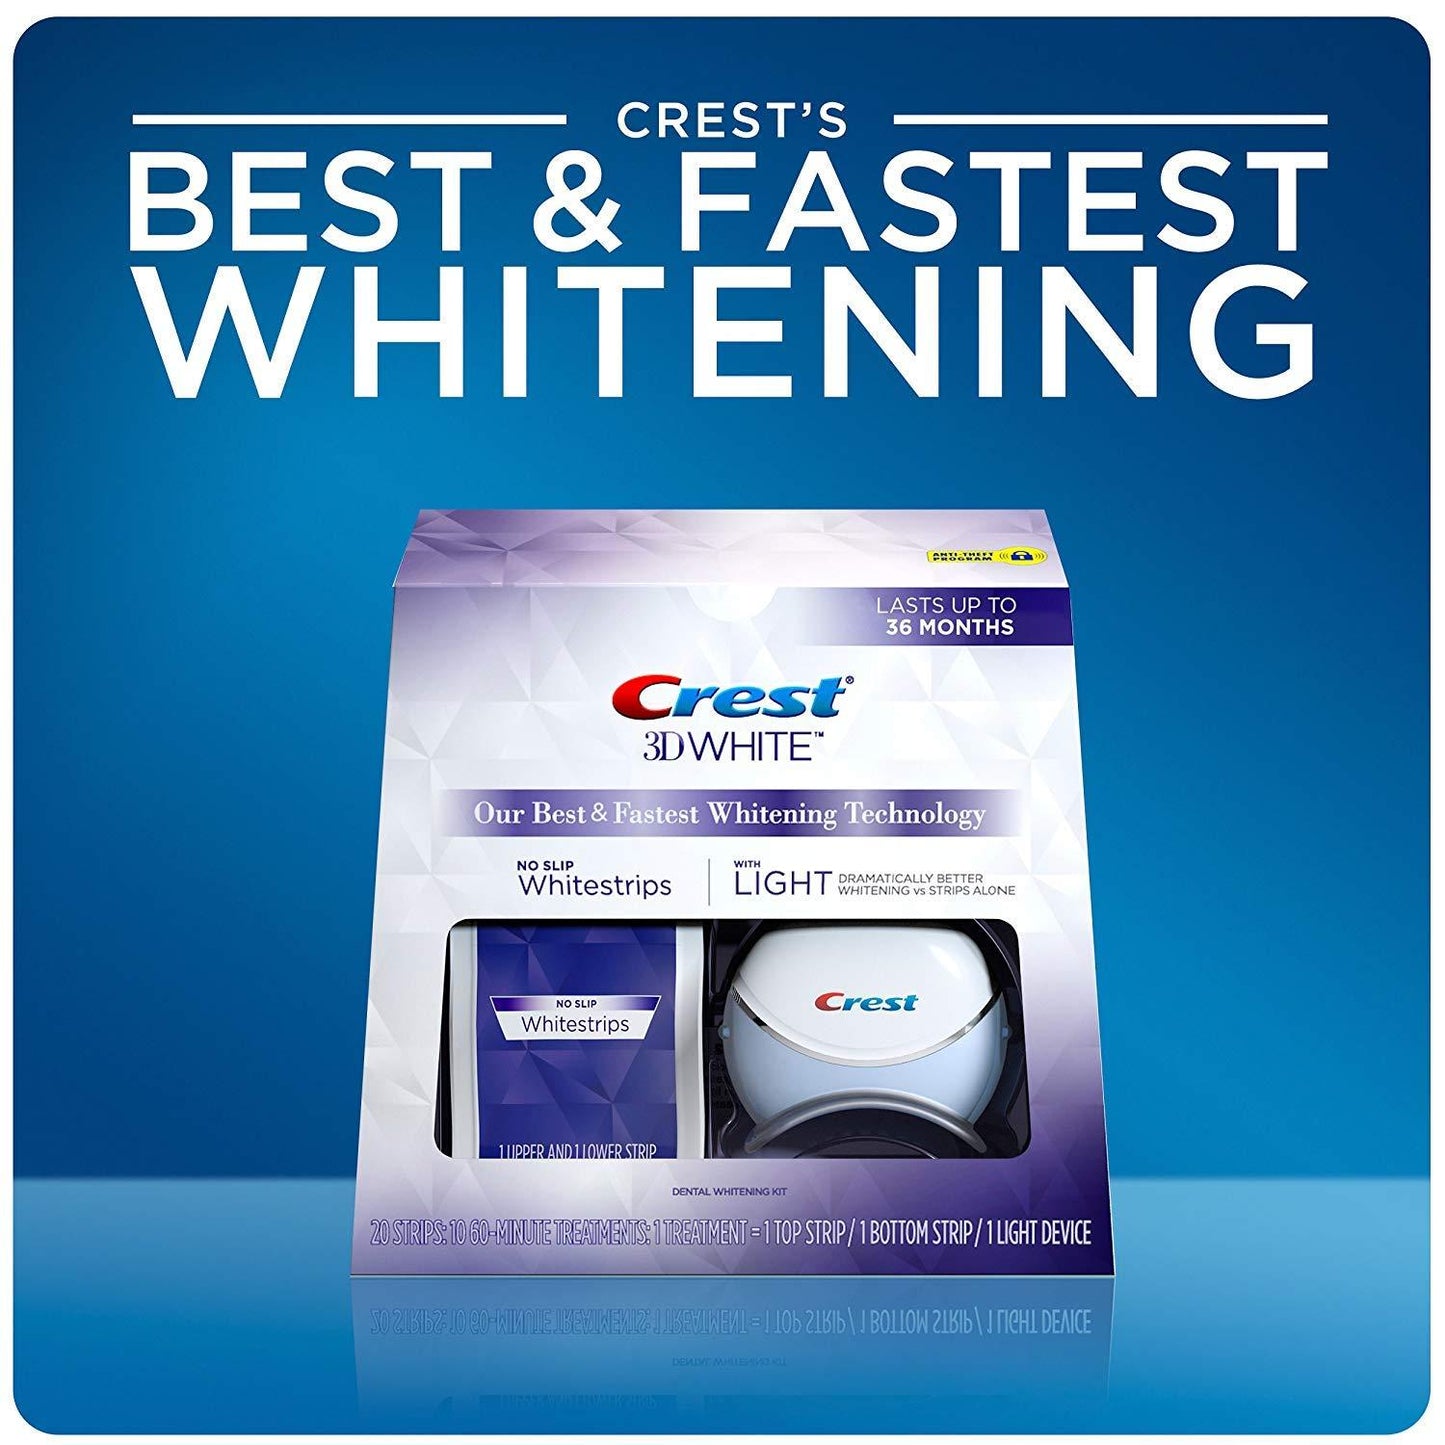 Crest 3D White Whitestrips with Light, Teeth Whitening Strips Kit, 10 count (Packaging May Vary)